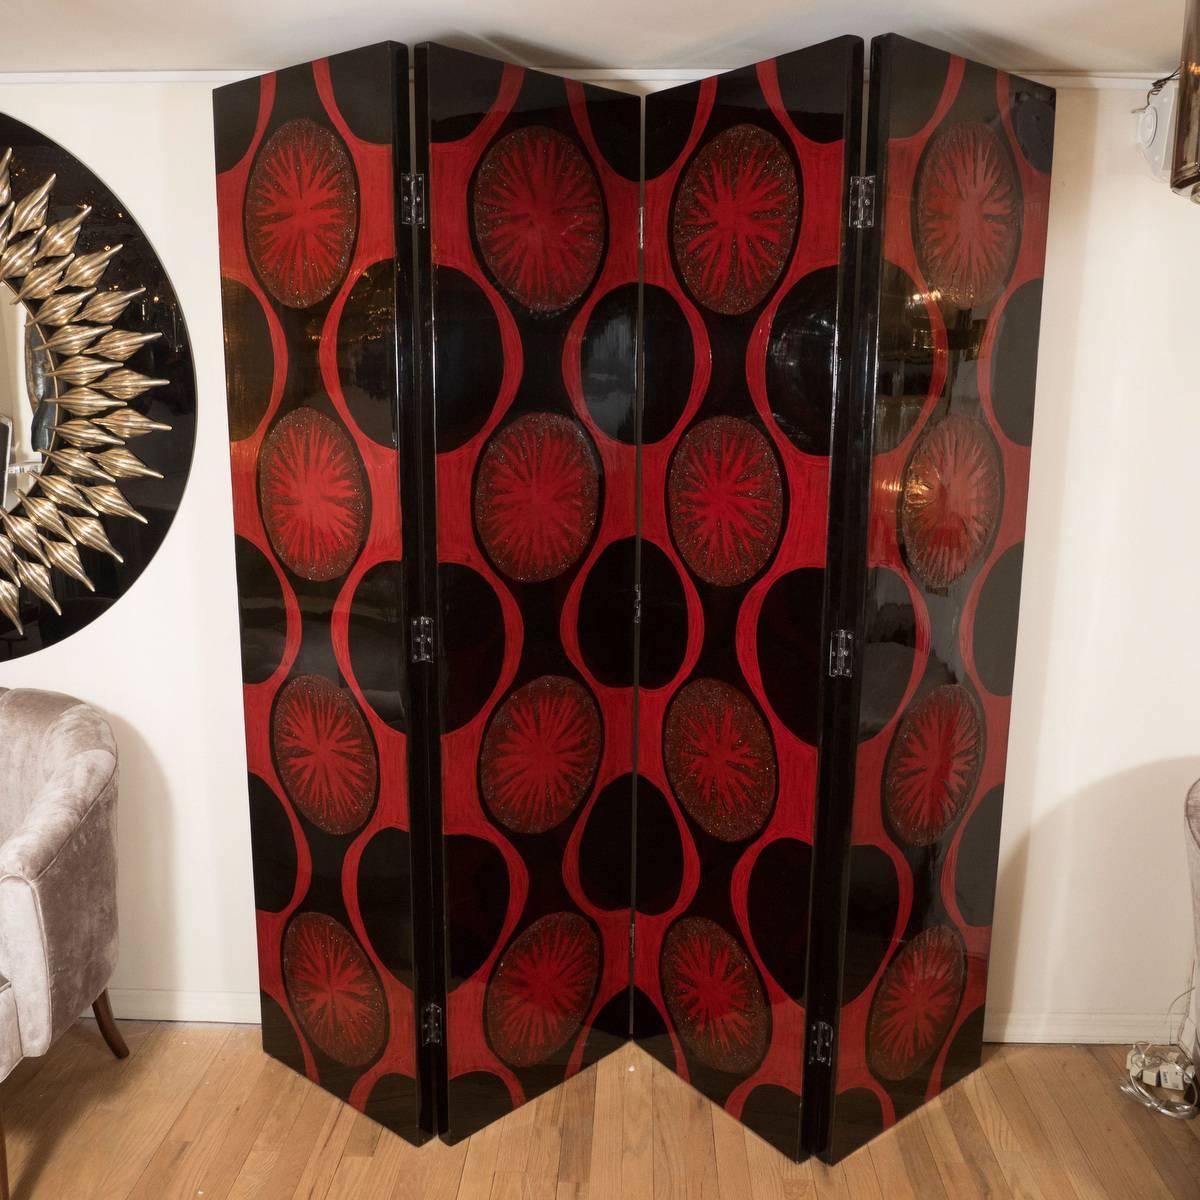 Four-panel black and red lacquered wood screen with modern design.